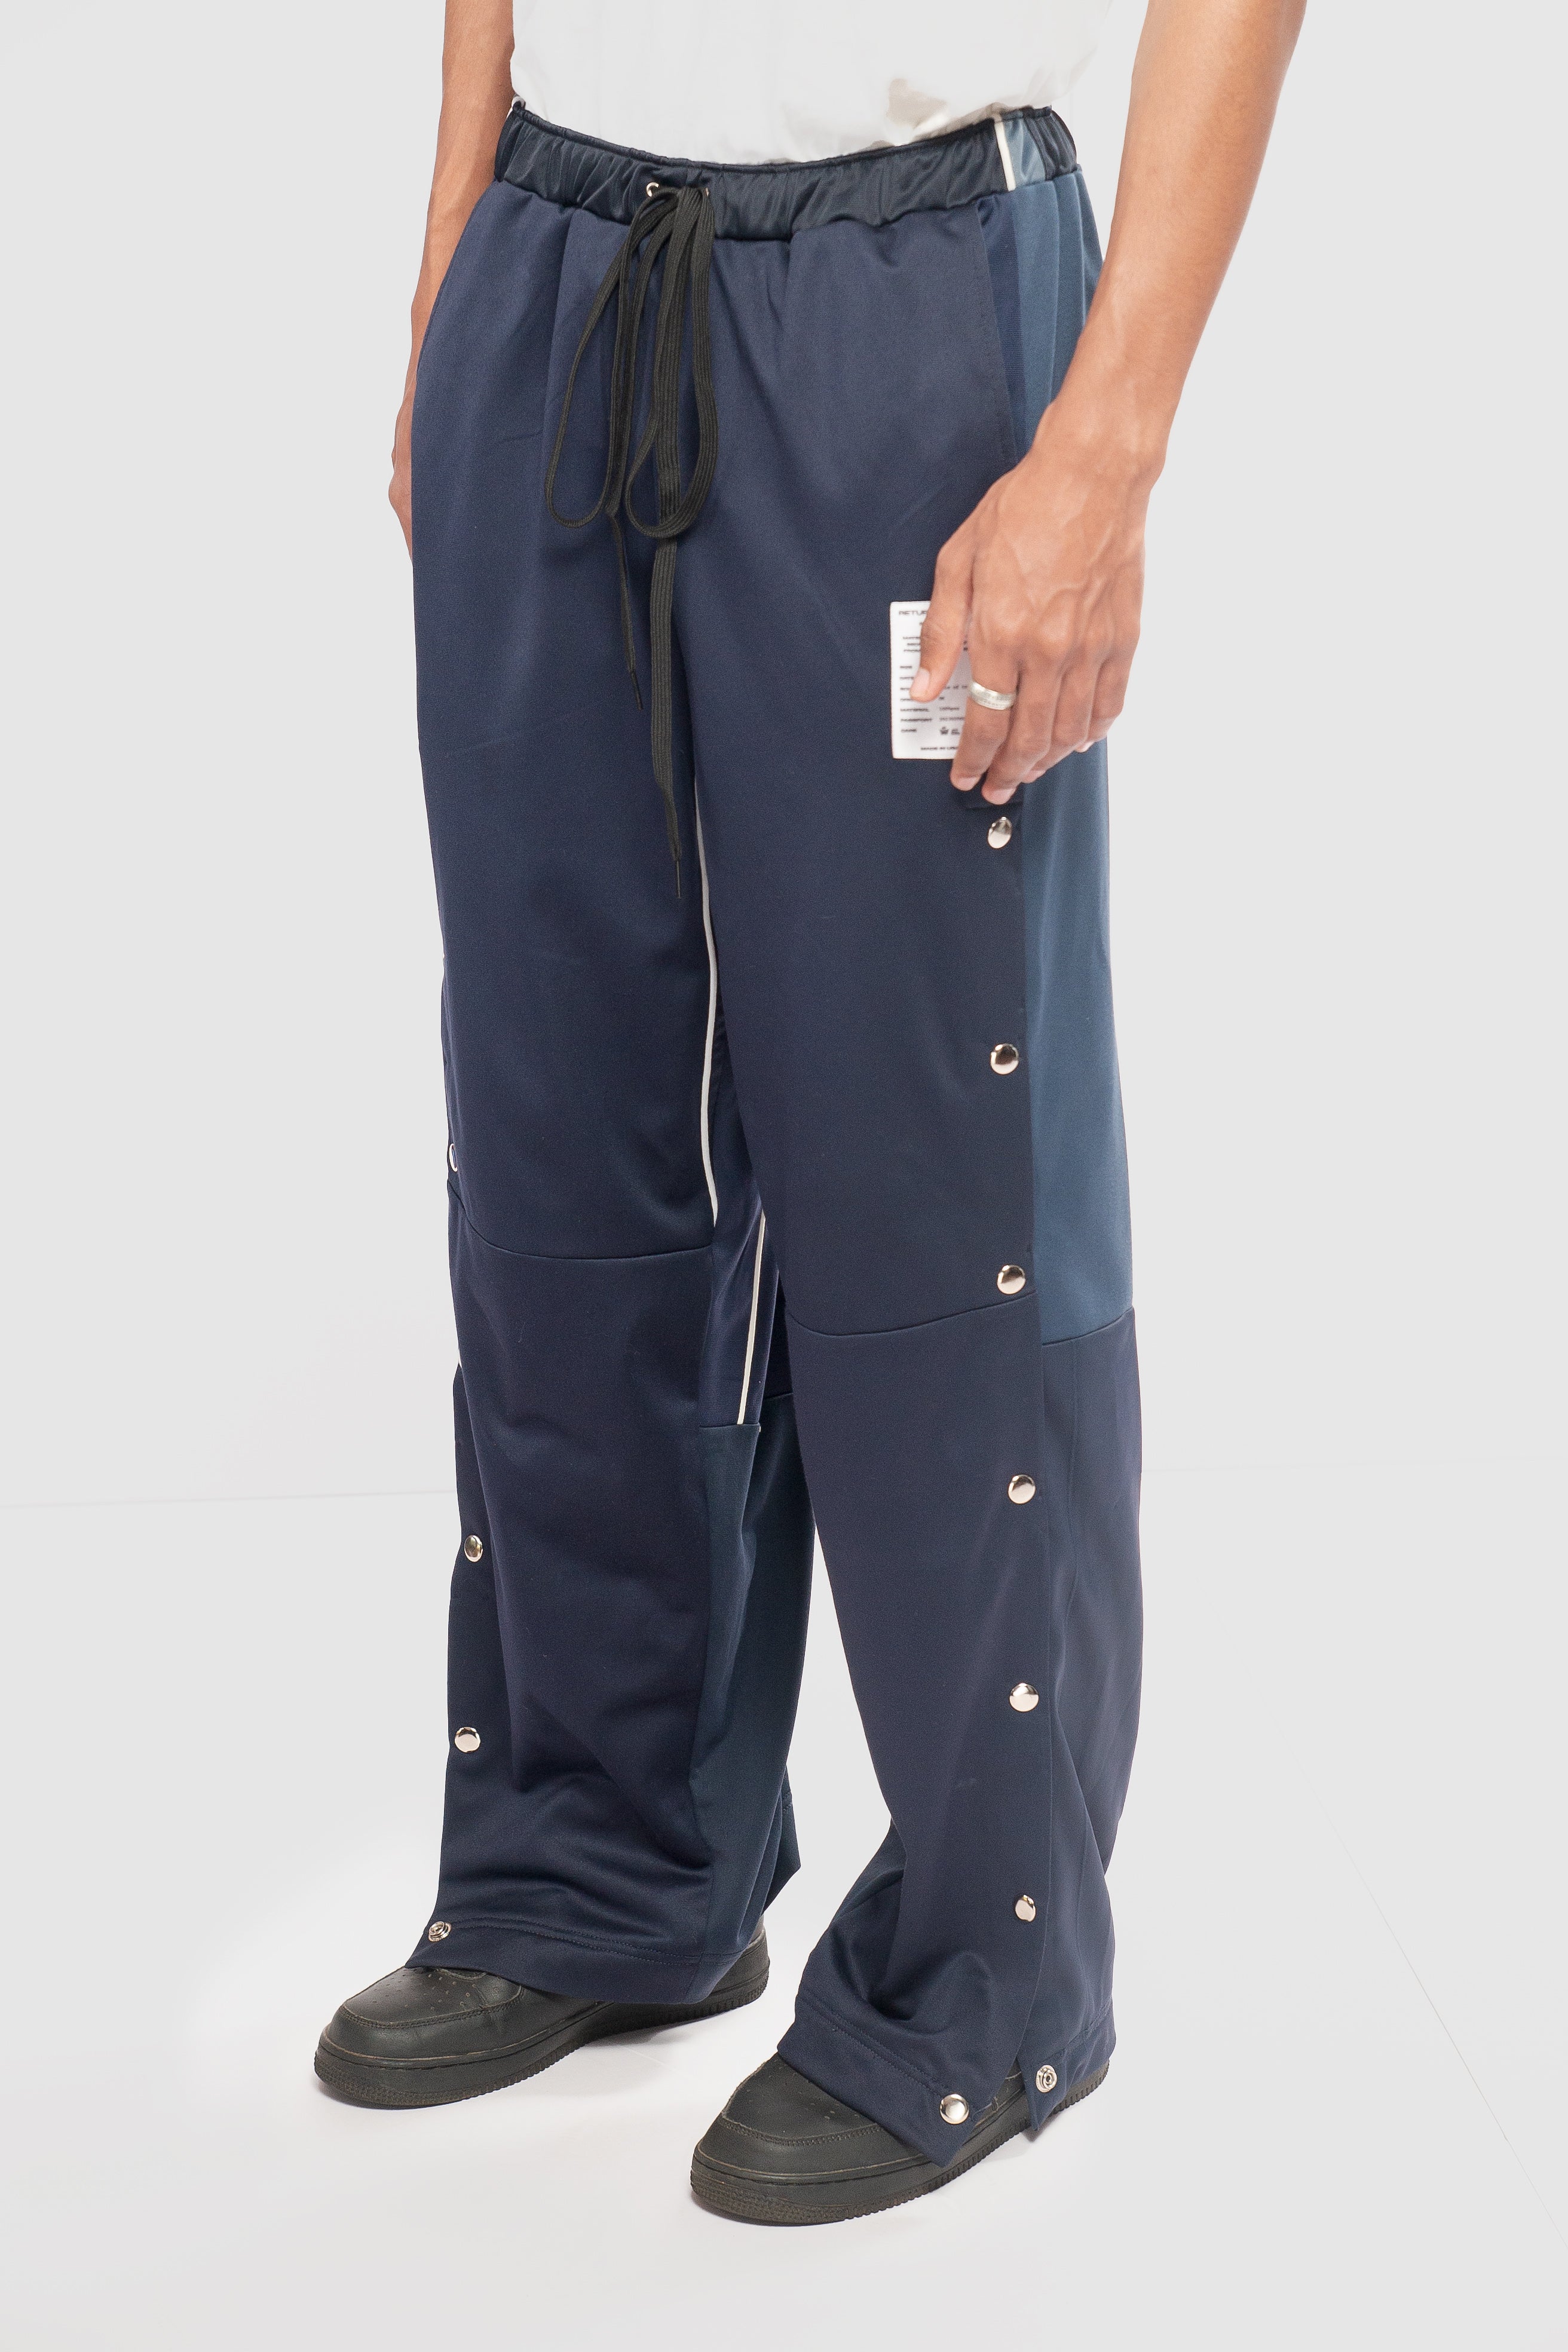 Starter Graphic Side-Snap Track Pants - Macy's